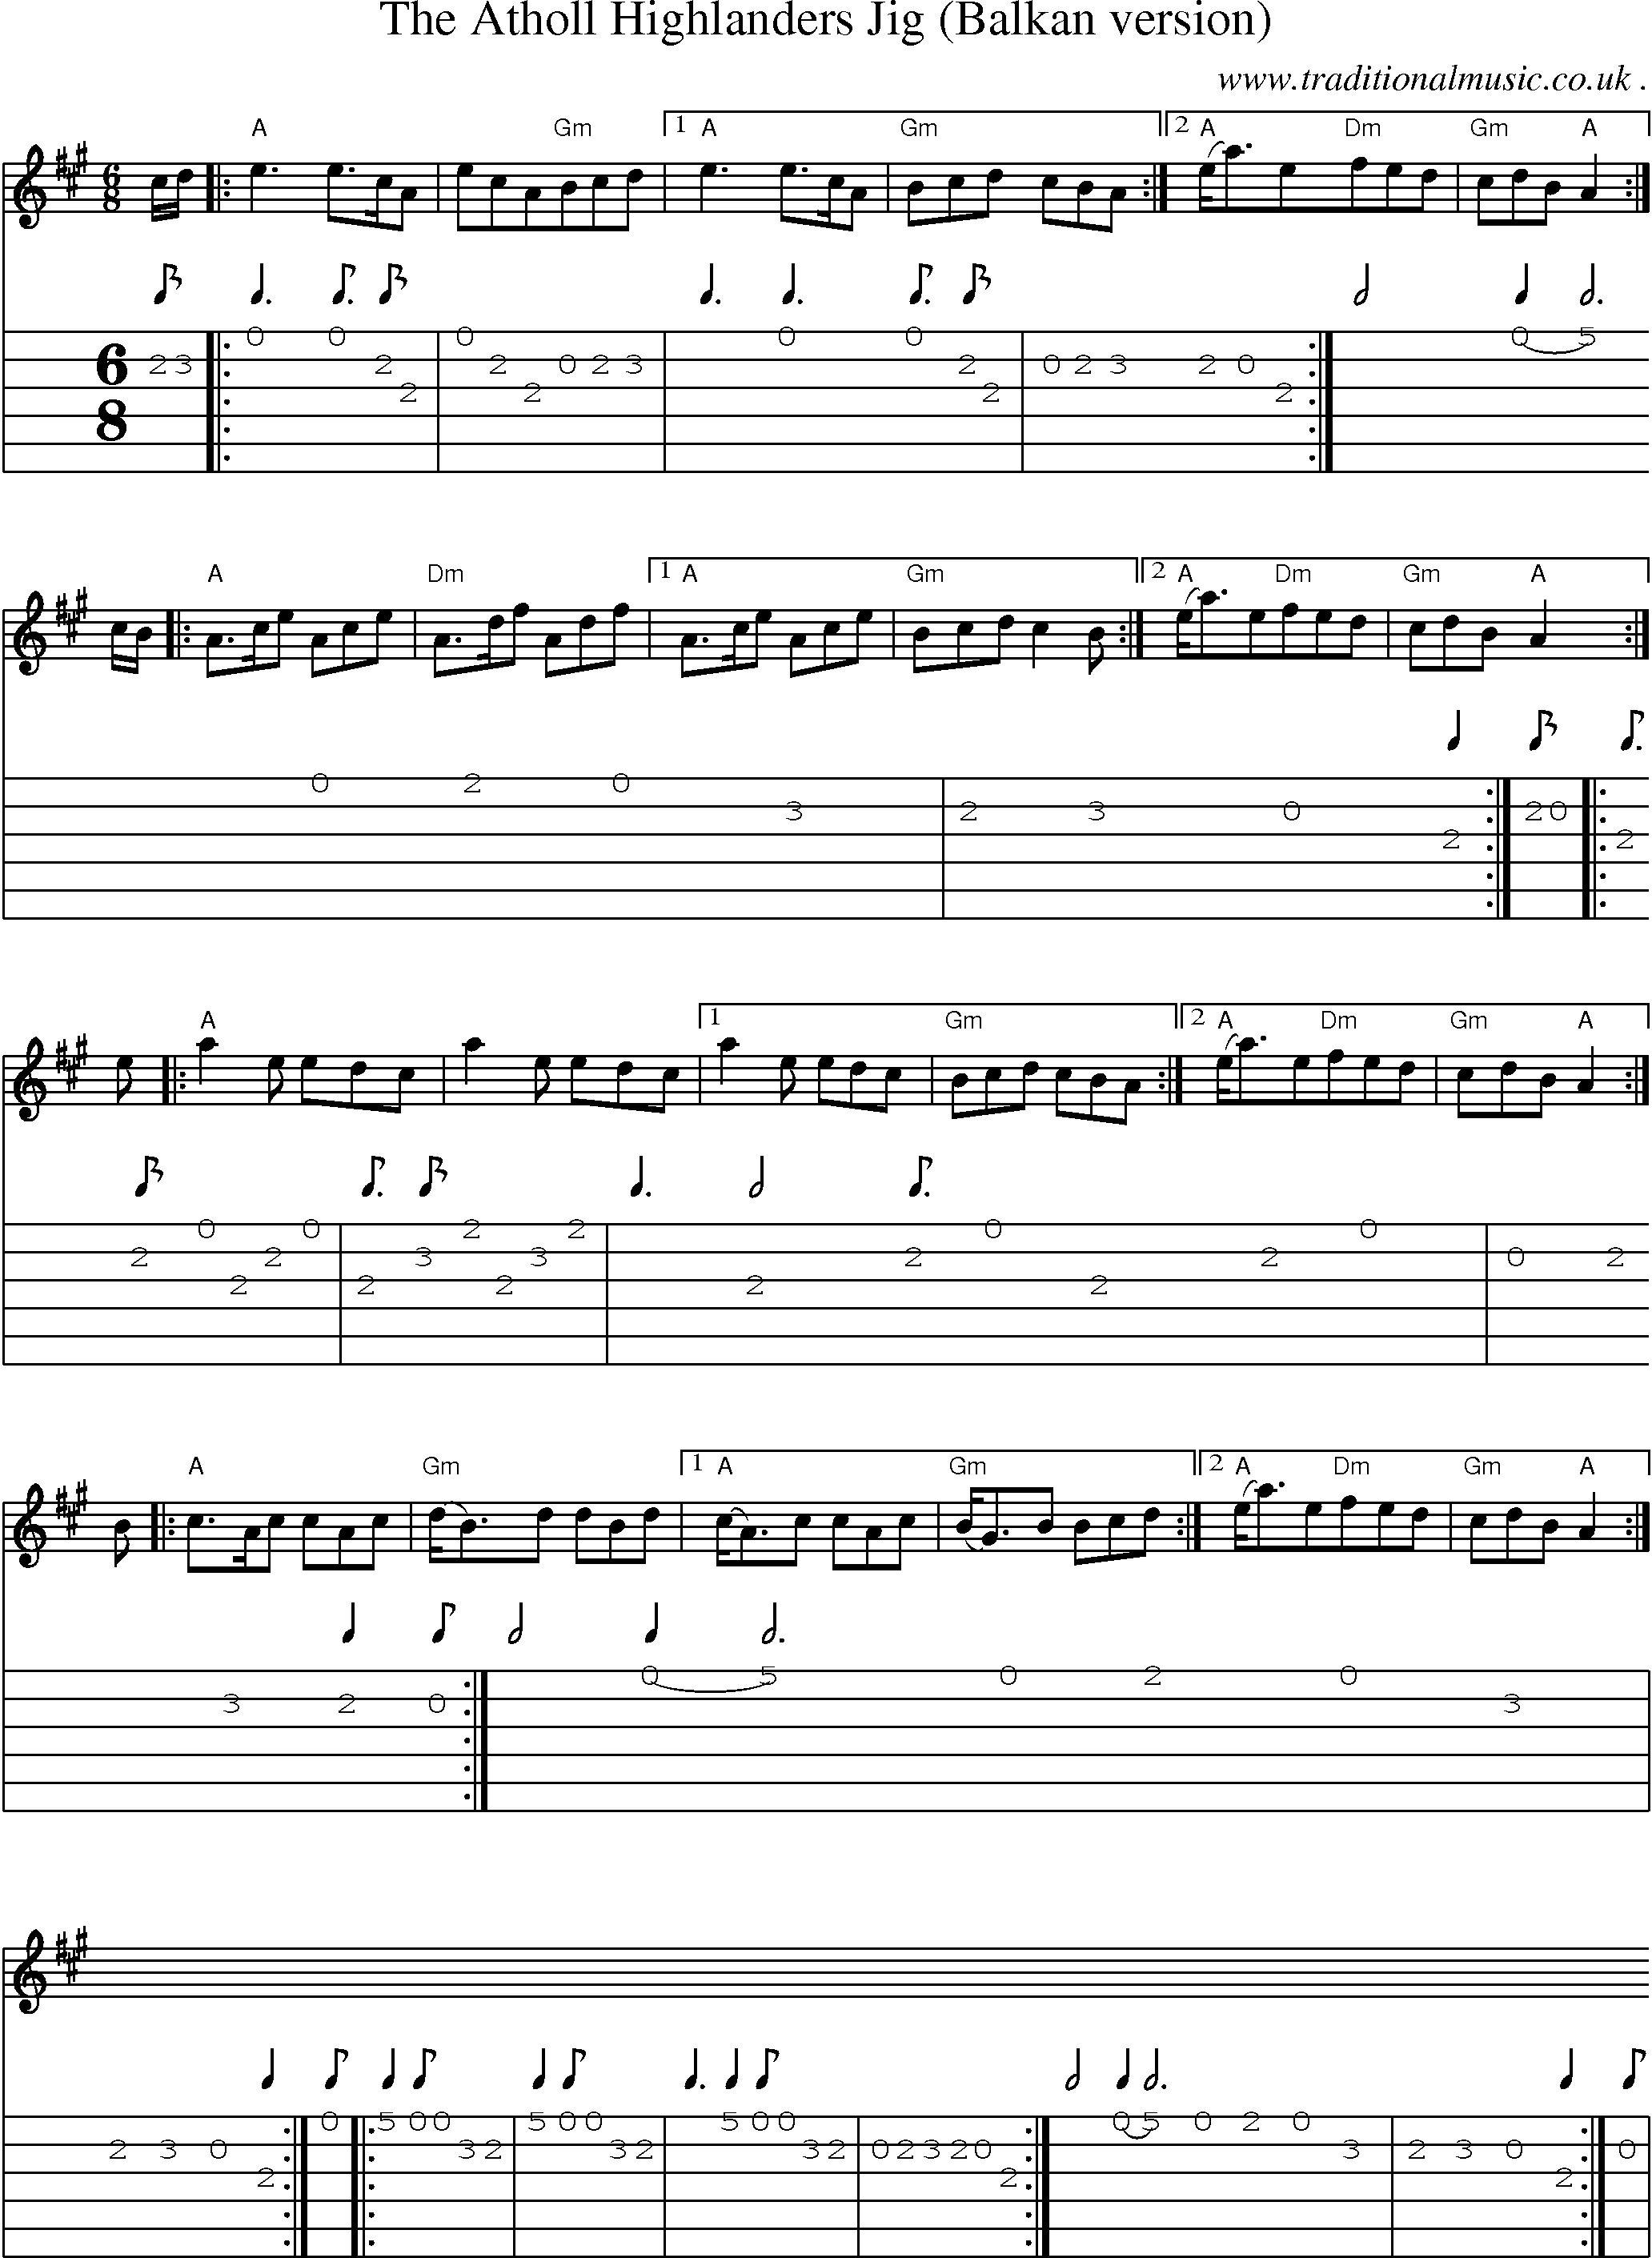 Sheet-Music and Guitar Tabs for The Atholl Highlanders Jig (balkan Version)